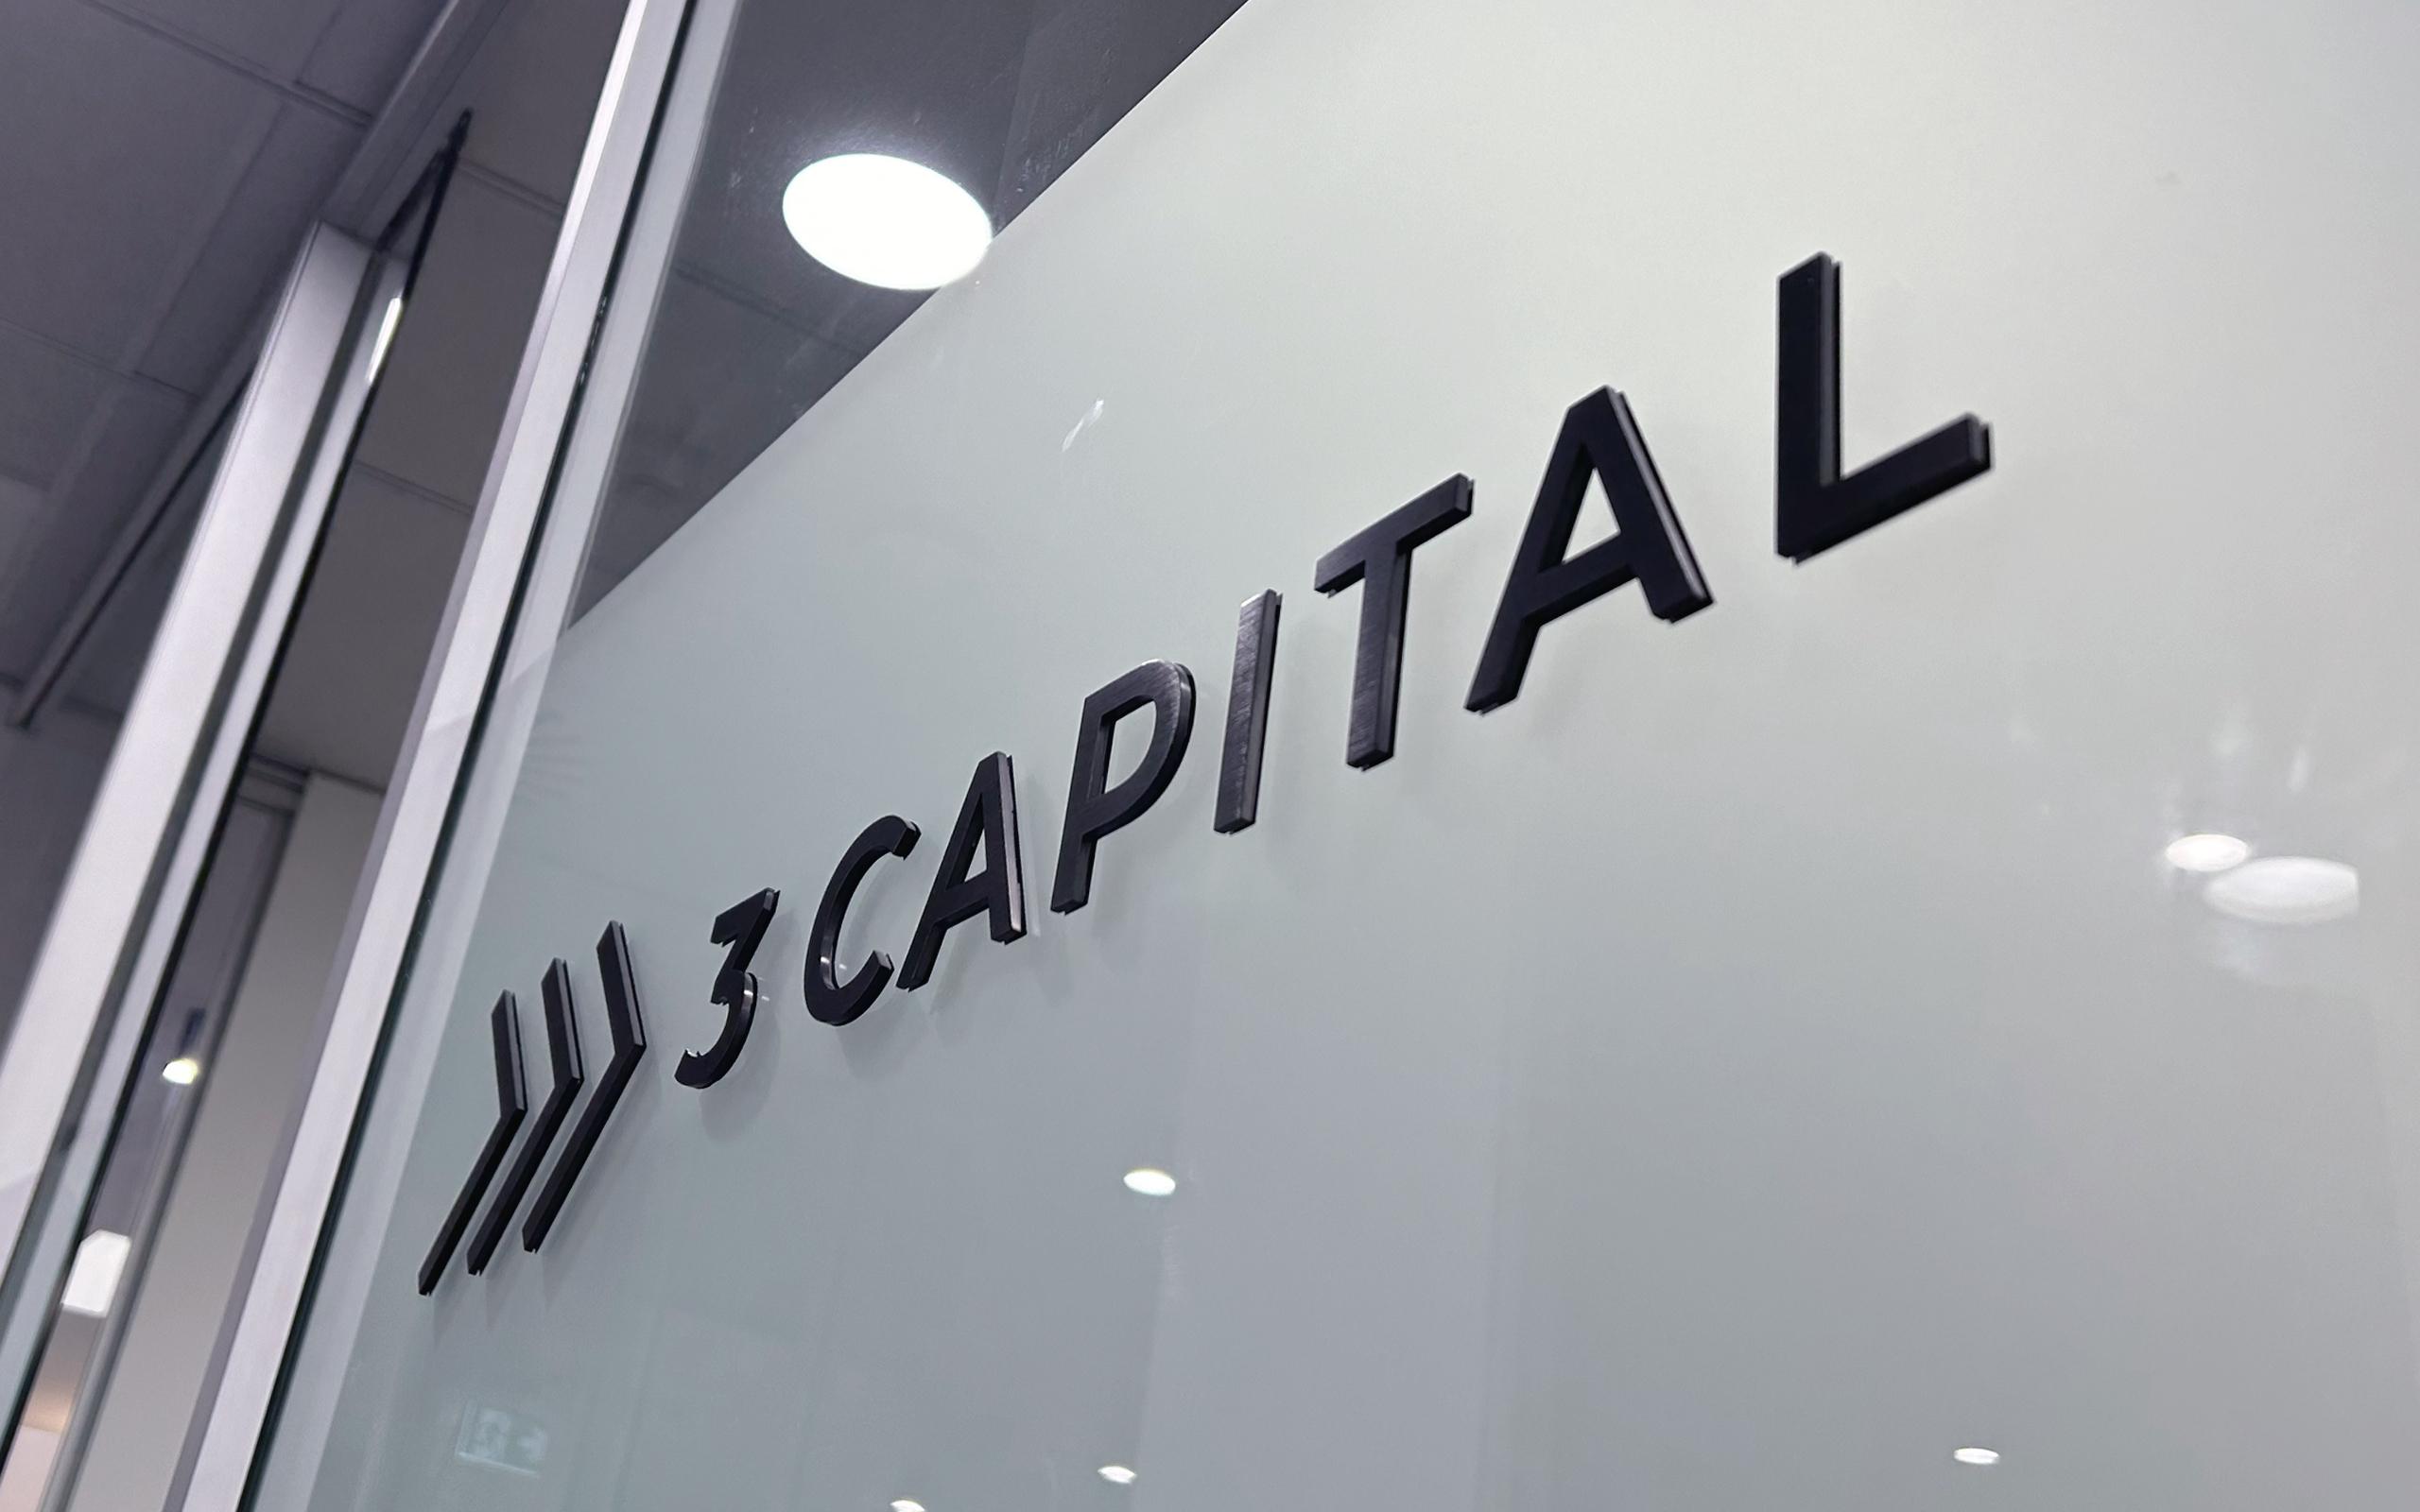 3 Capital on glass 3d letters 